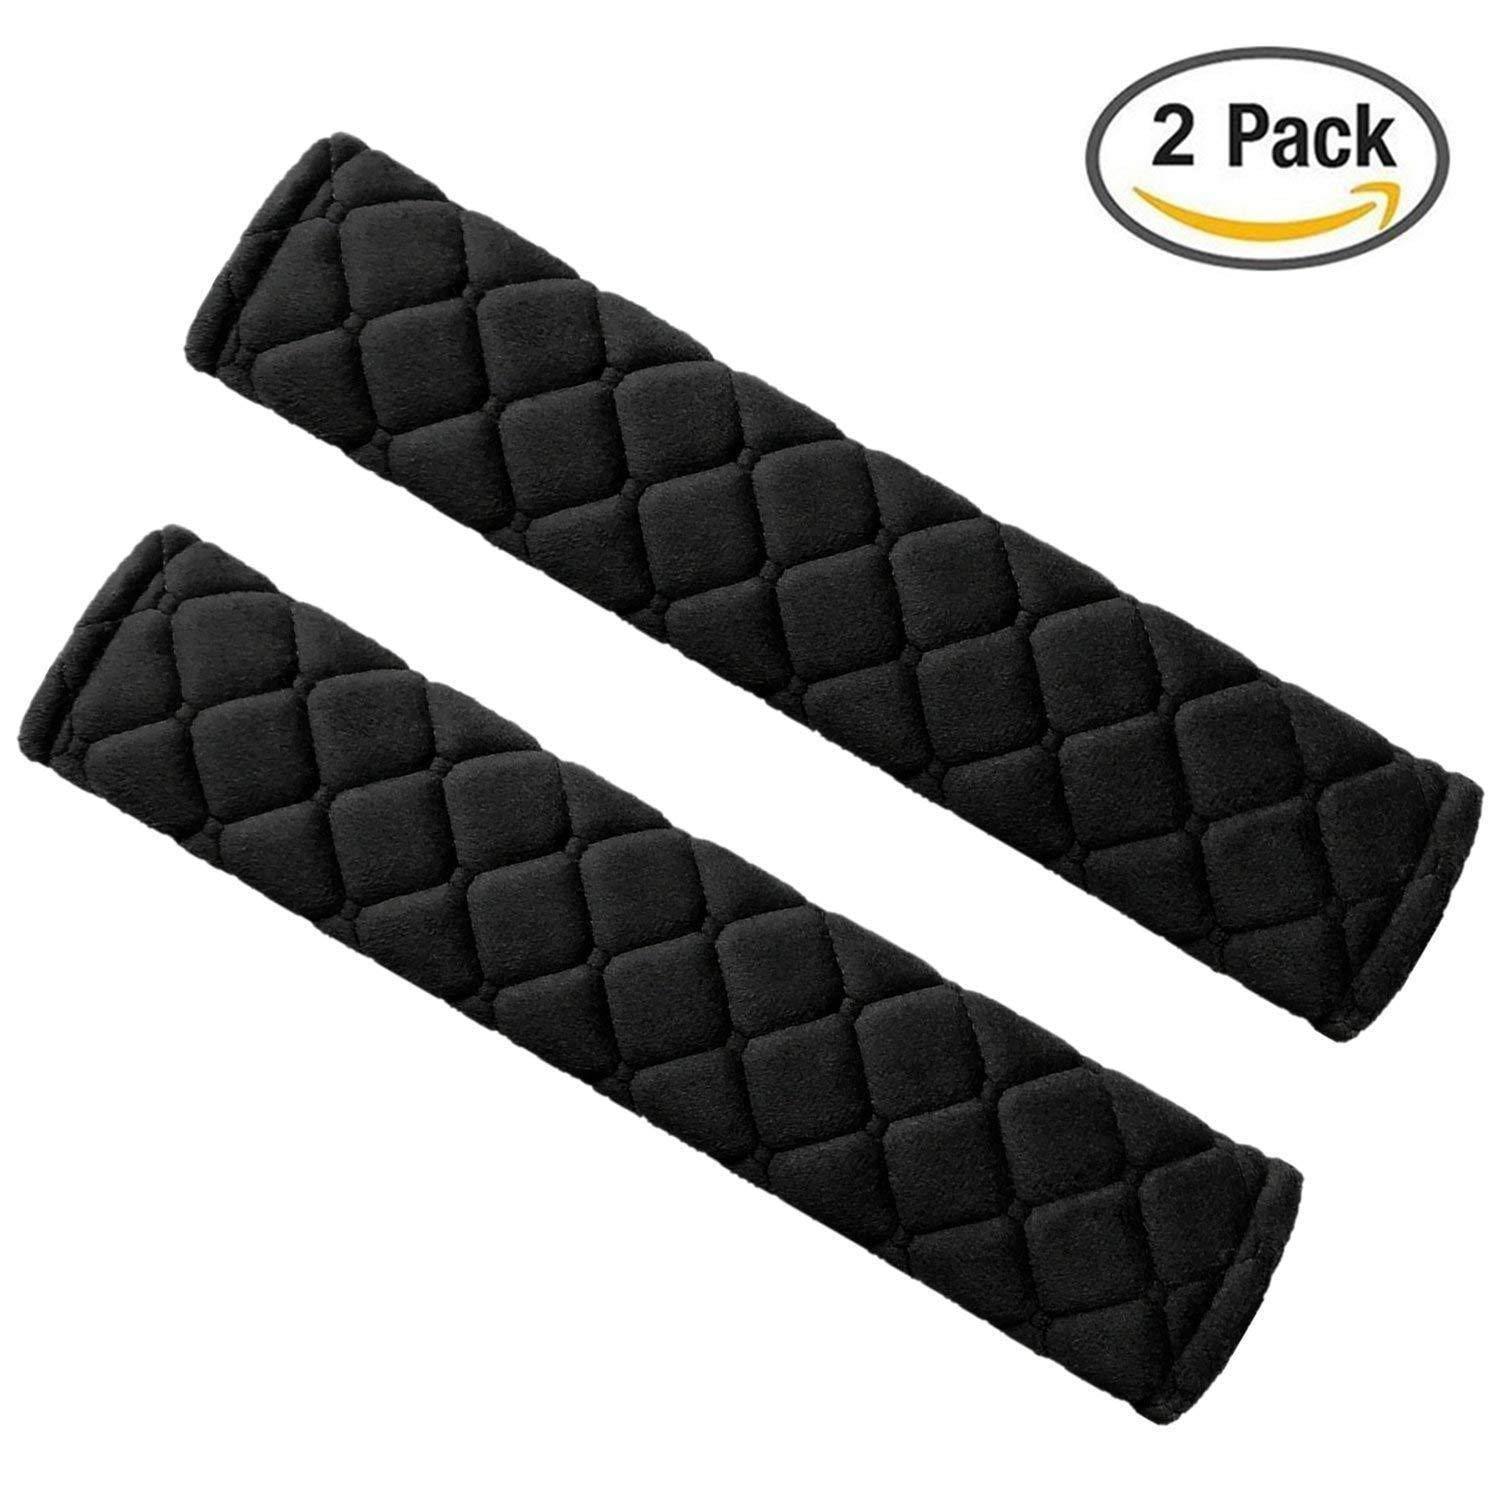 KIDS,ADULTS SEAT BELT COVERS,FLEECE PADS,CUSHIONS,SHOULDER STRAP PROTECTOR pads 